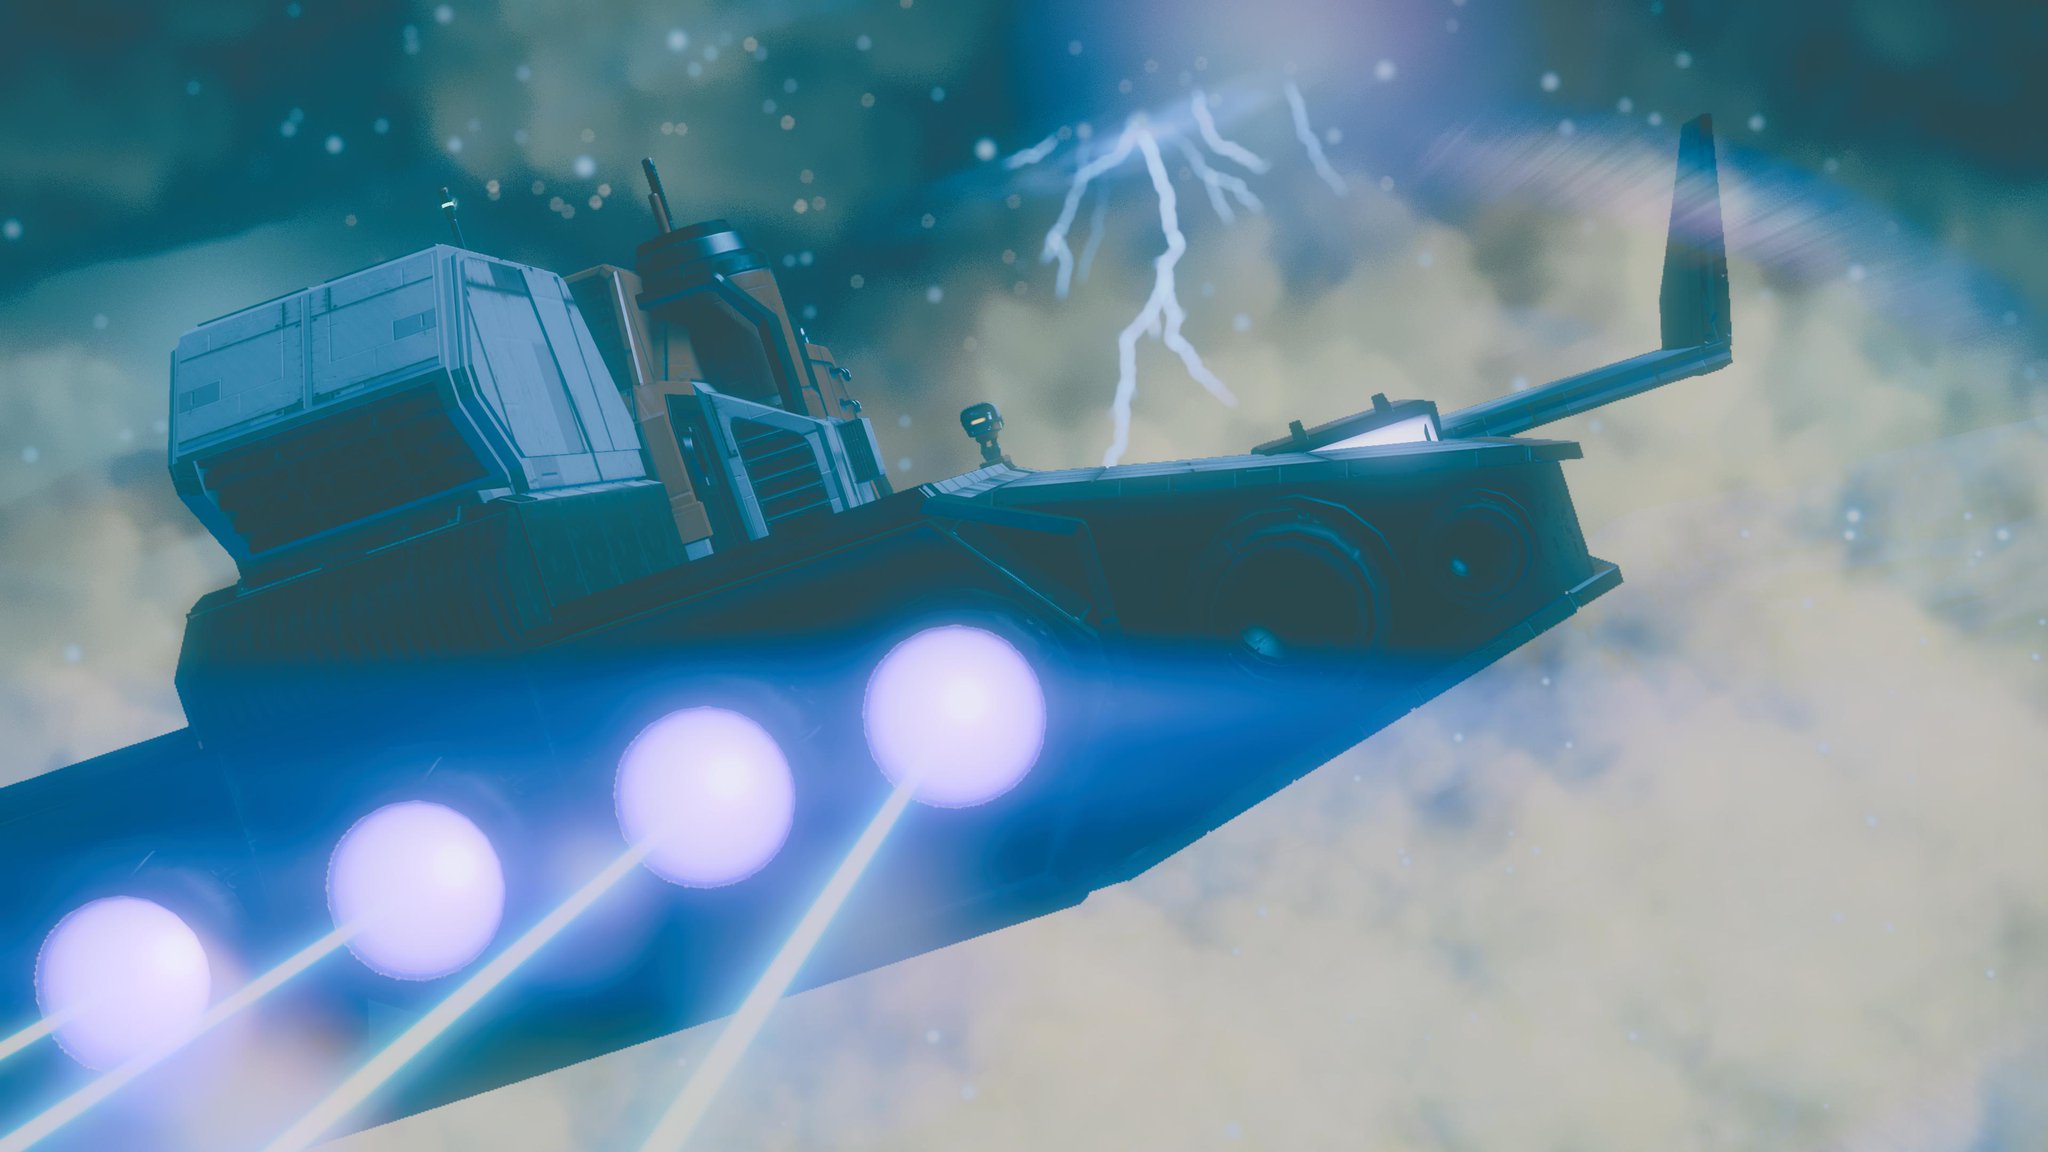 A spaceship careering through the clouds as a lightning storm erupts in front.